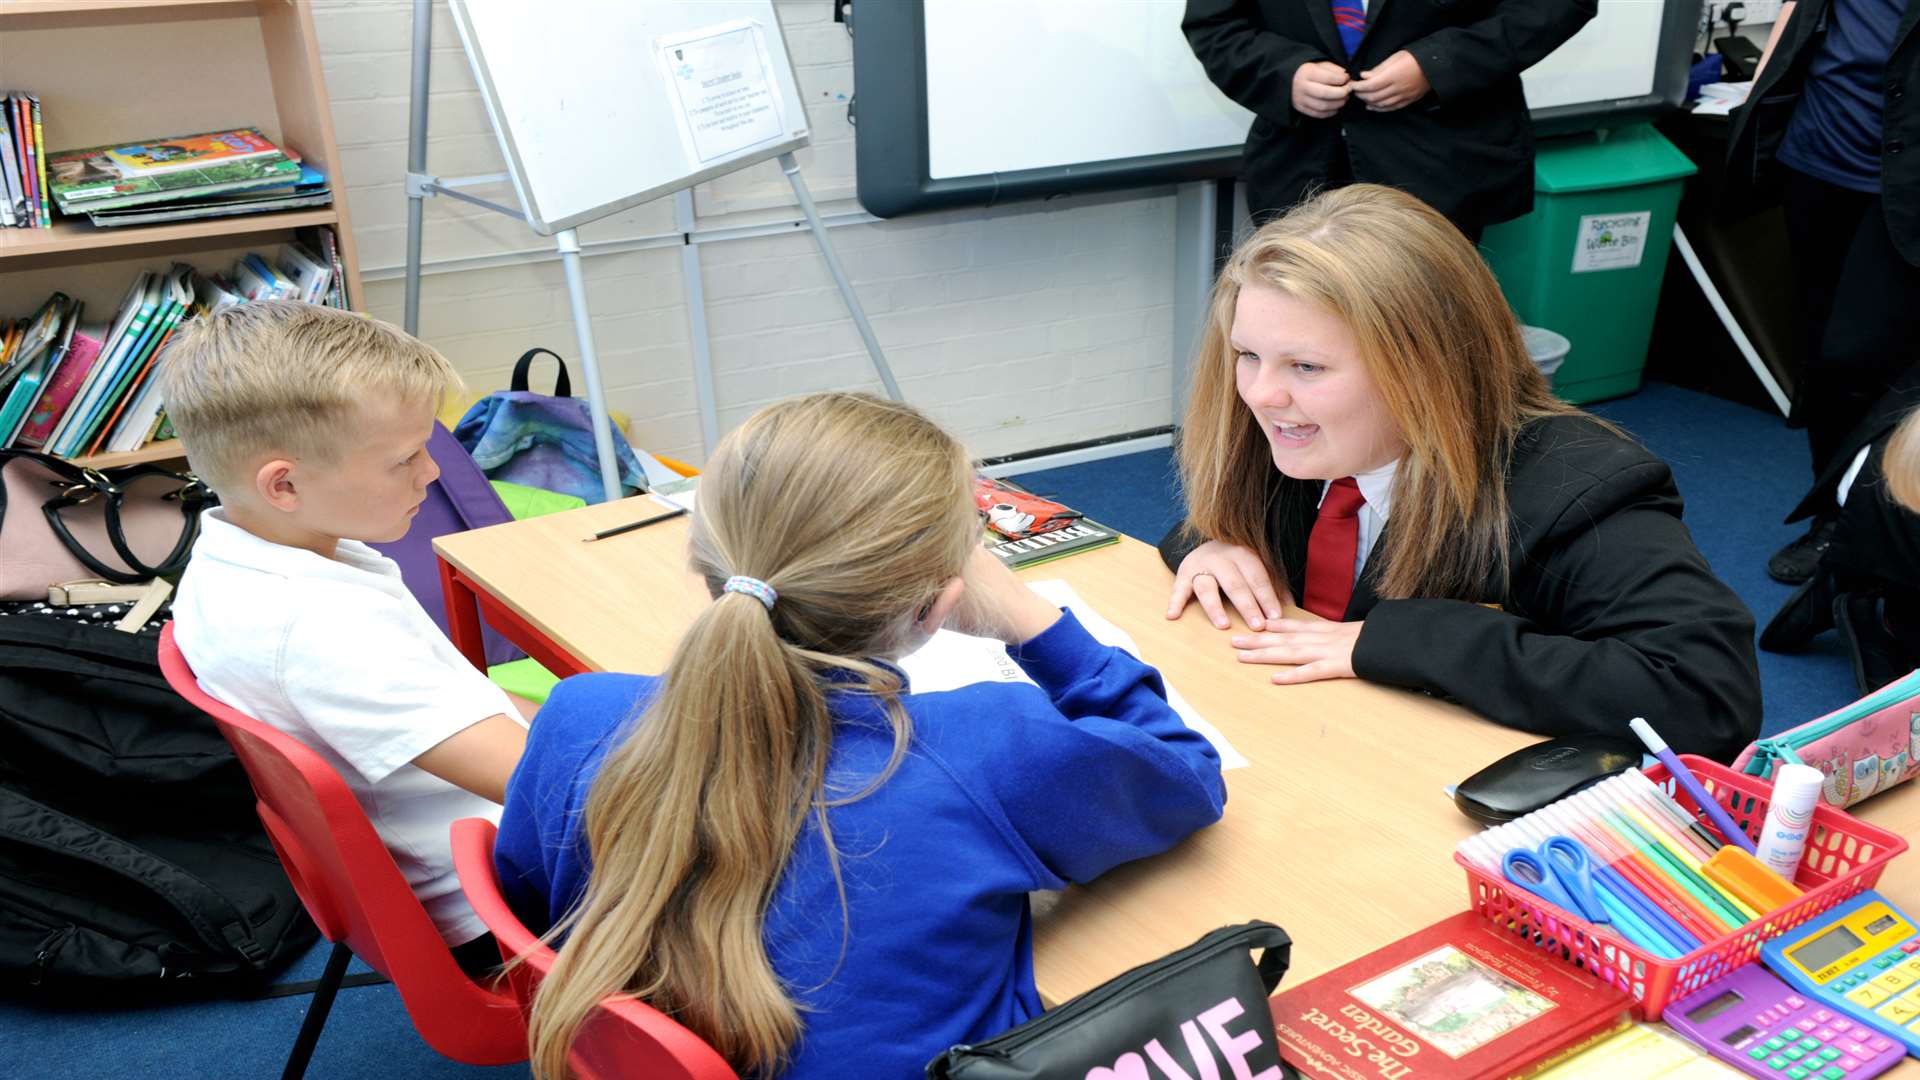 Katie Titus 14 (right), talking to year 5 pupils